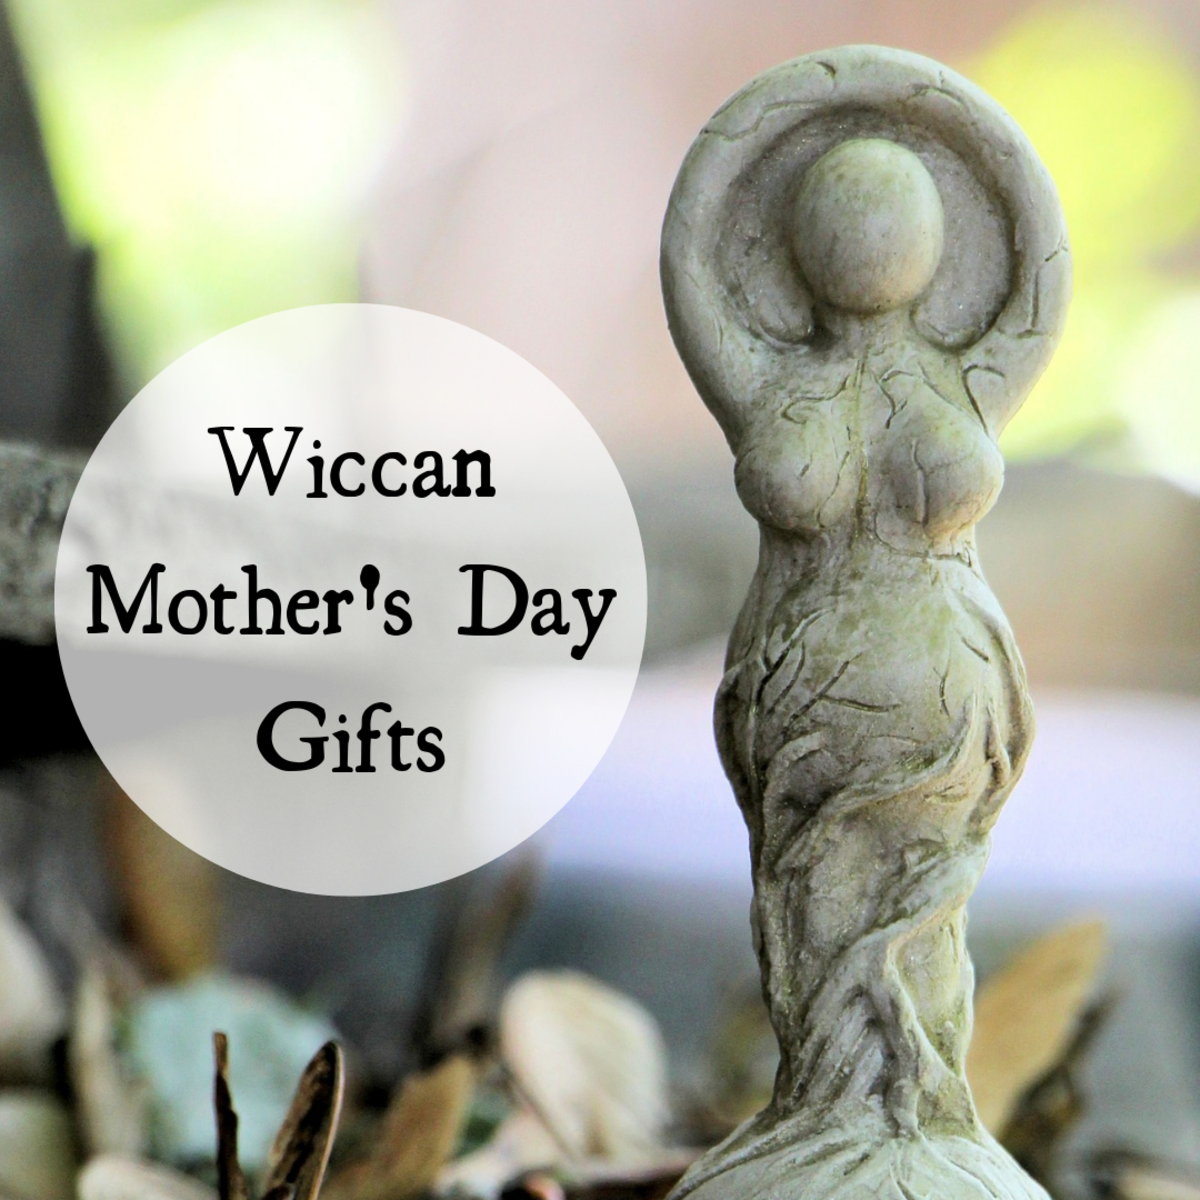 6 Great Wiccan Gift Ideas for Mother's Day